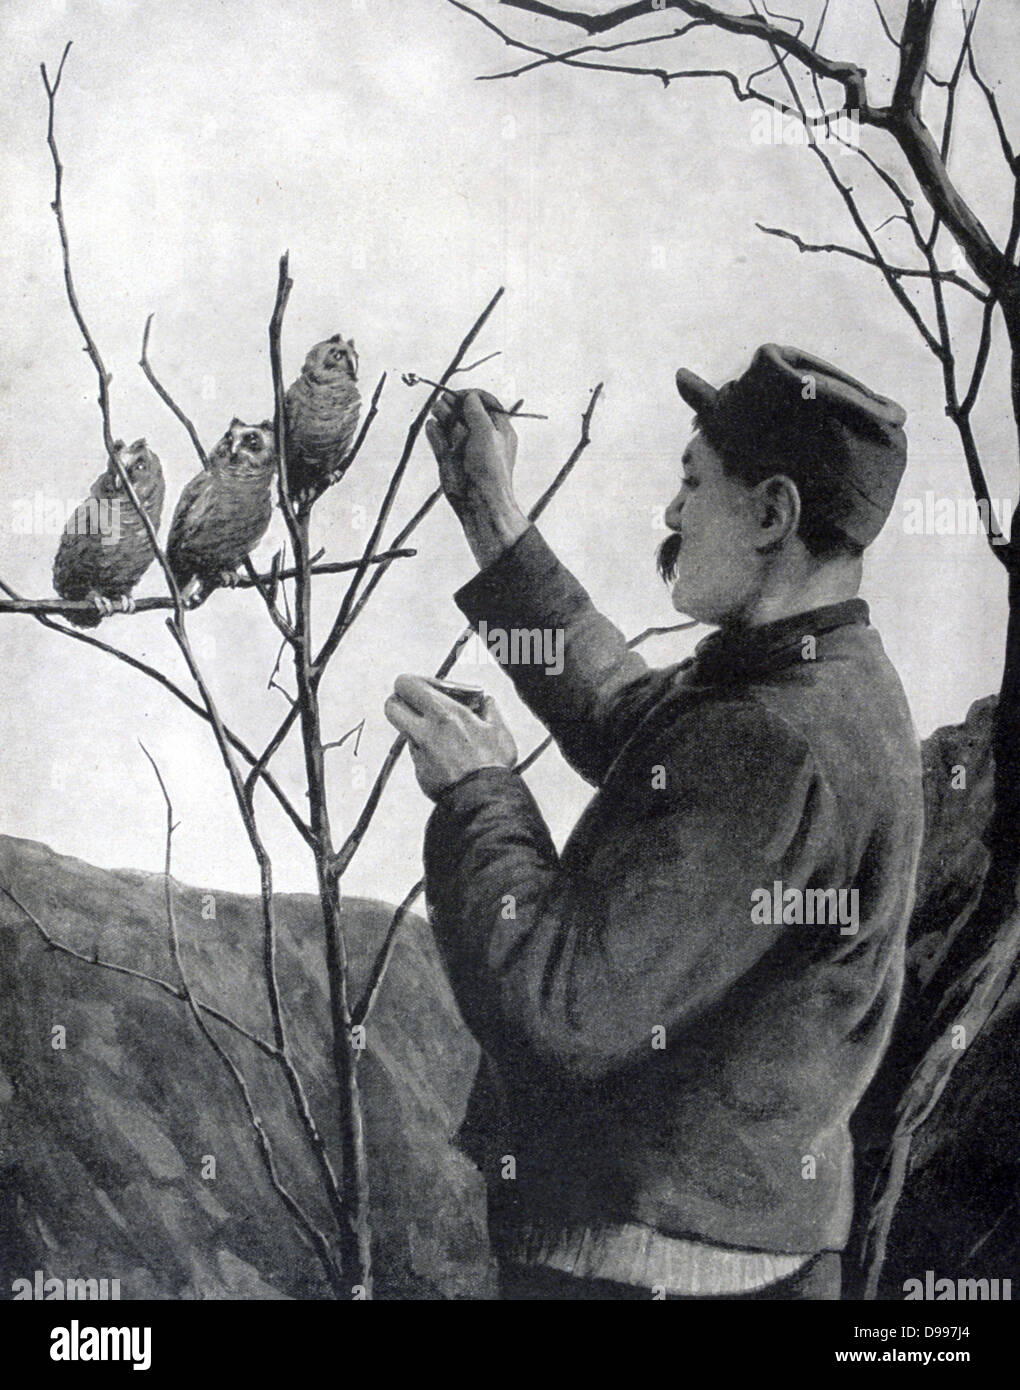 World War I 1914-1918:  French soldier relieving boredom in the trenches by feeding a family of young owls. From 'Le Pays de France', Paris, 17 June 1915. Stock Photo